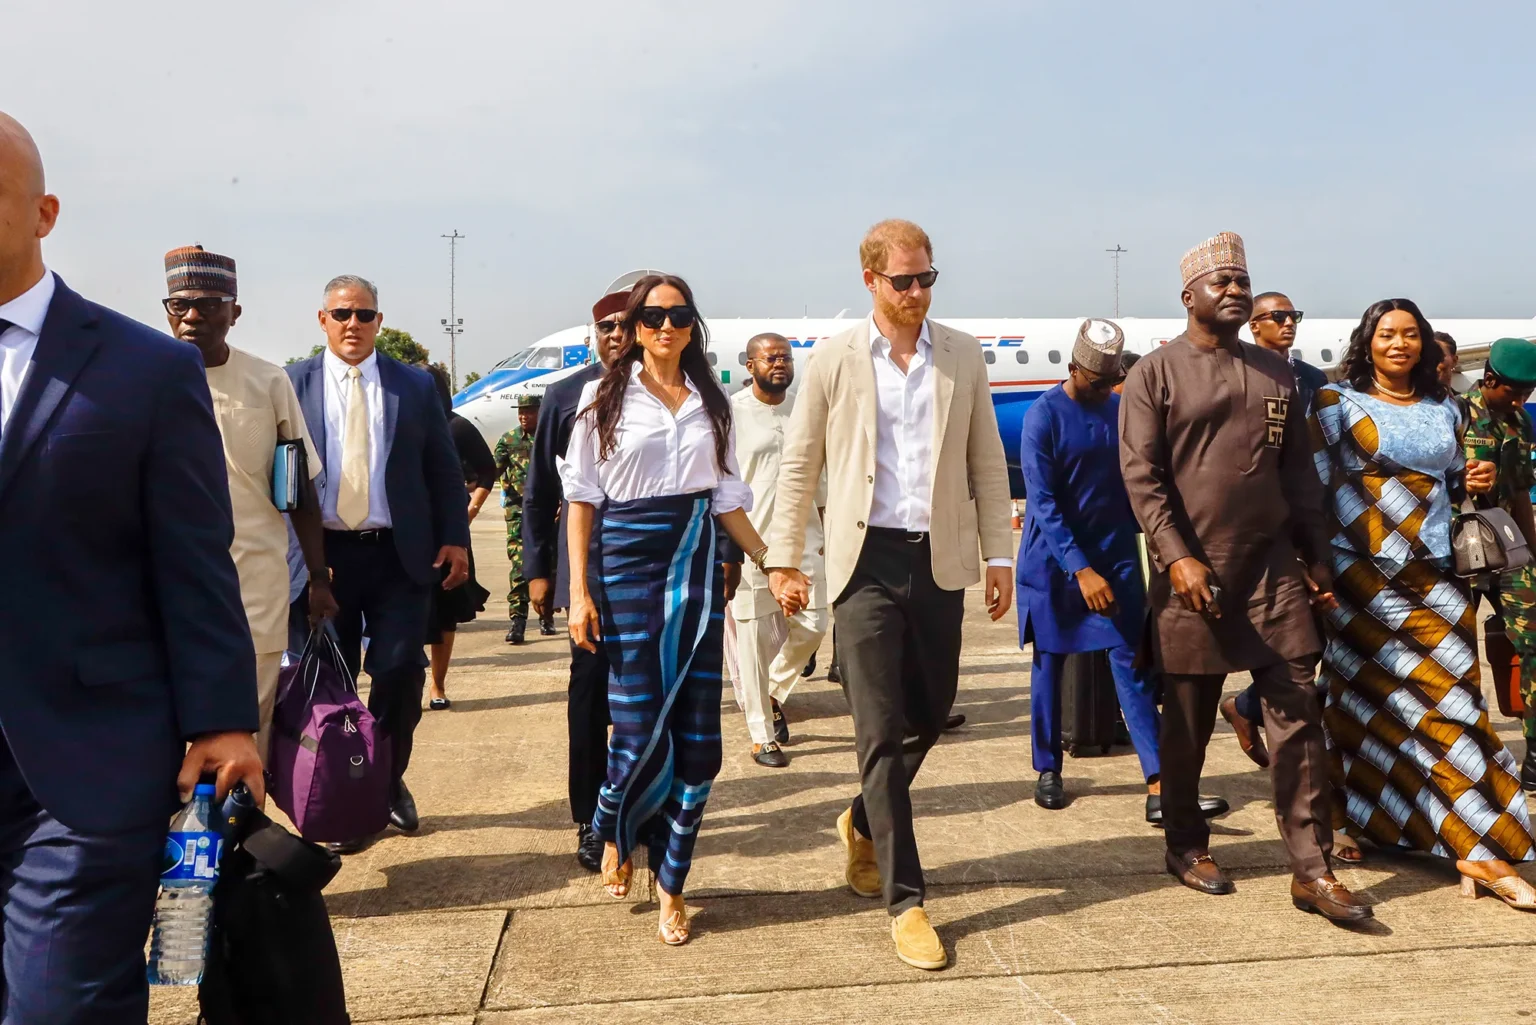 prince-harry-meghan-markle-set-to-visit-another-country-following-nigeria-trip